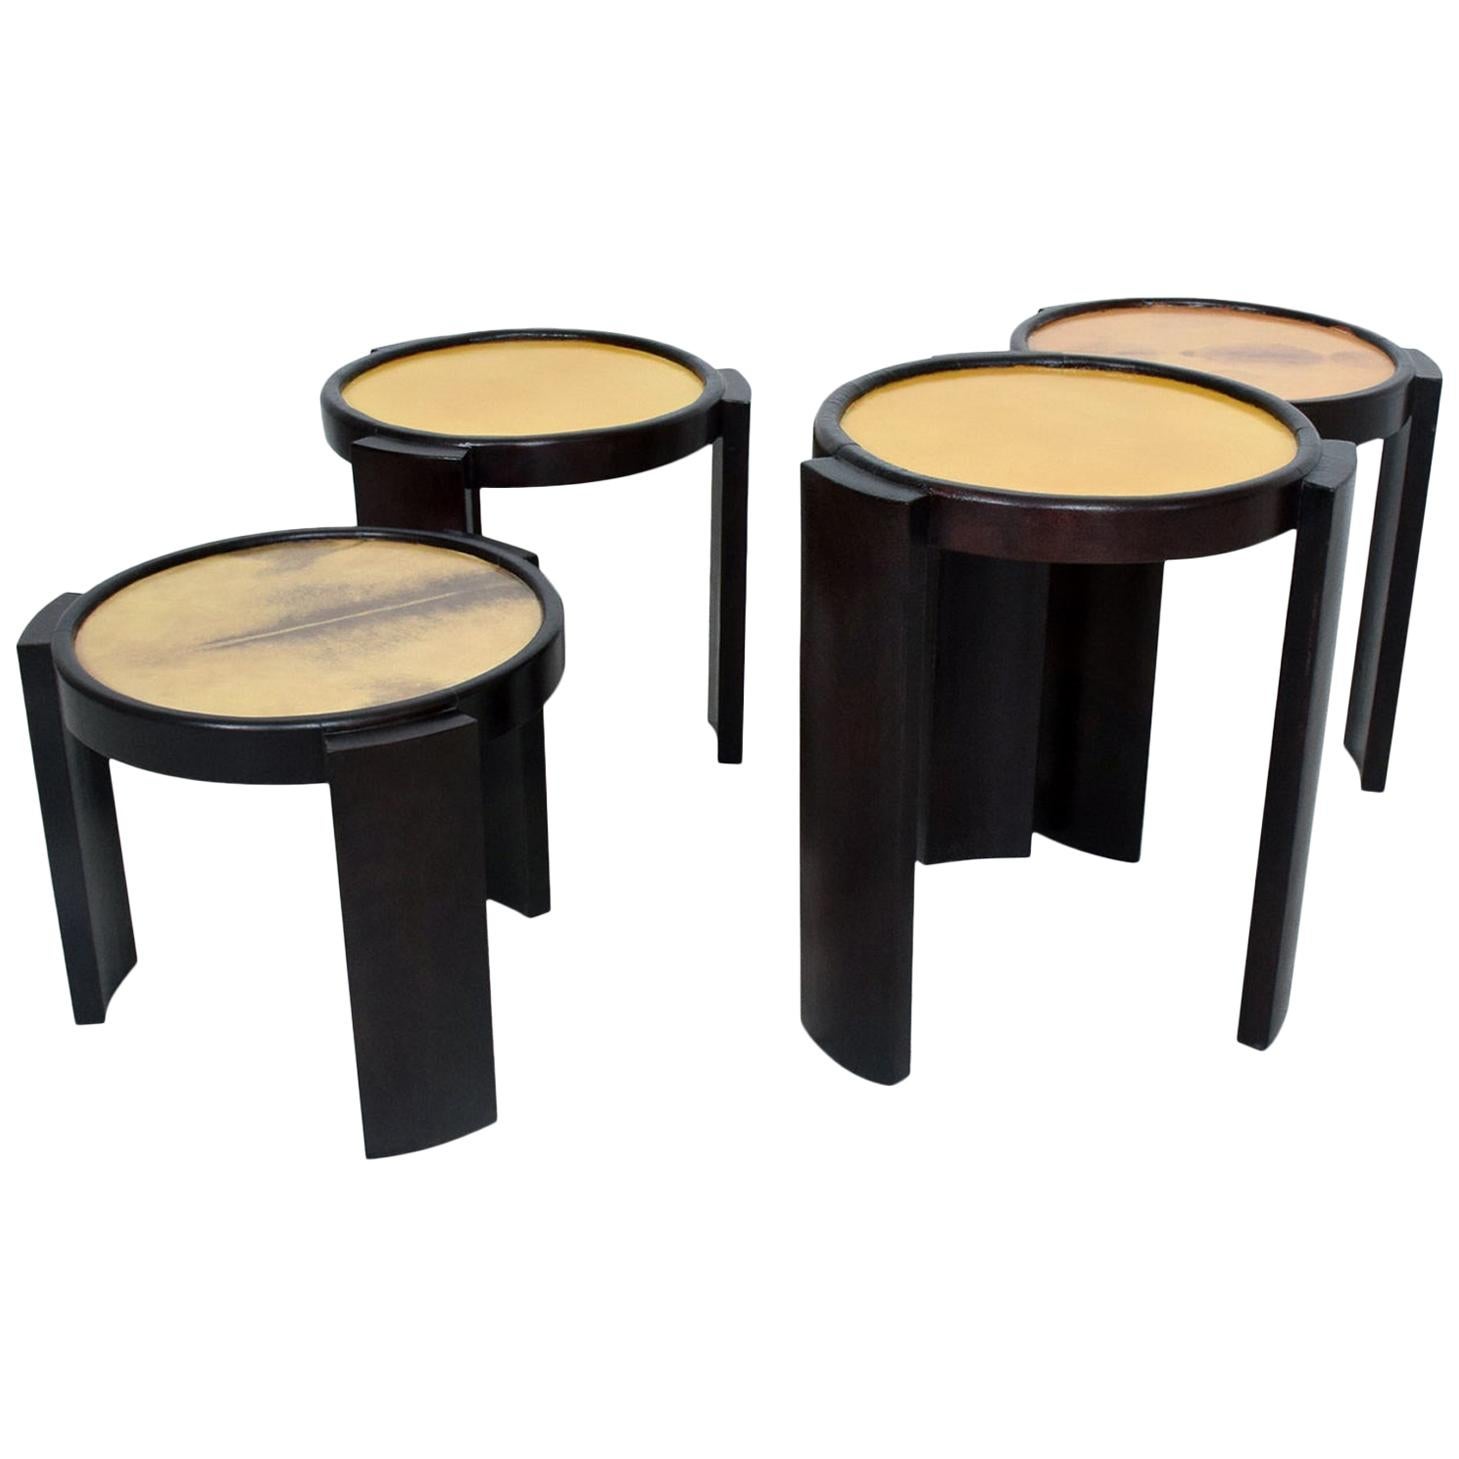 1950s Four Nesting Tables Goatskin and Leather Escudero Mexican Modernism